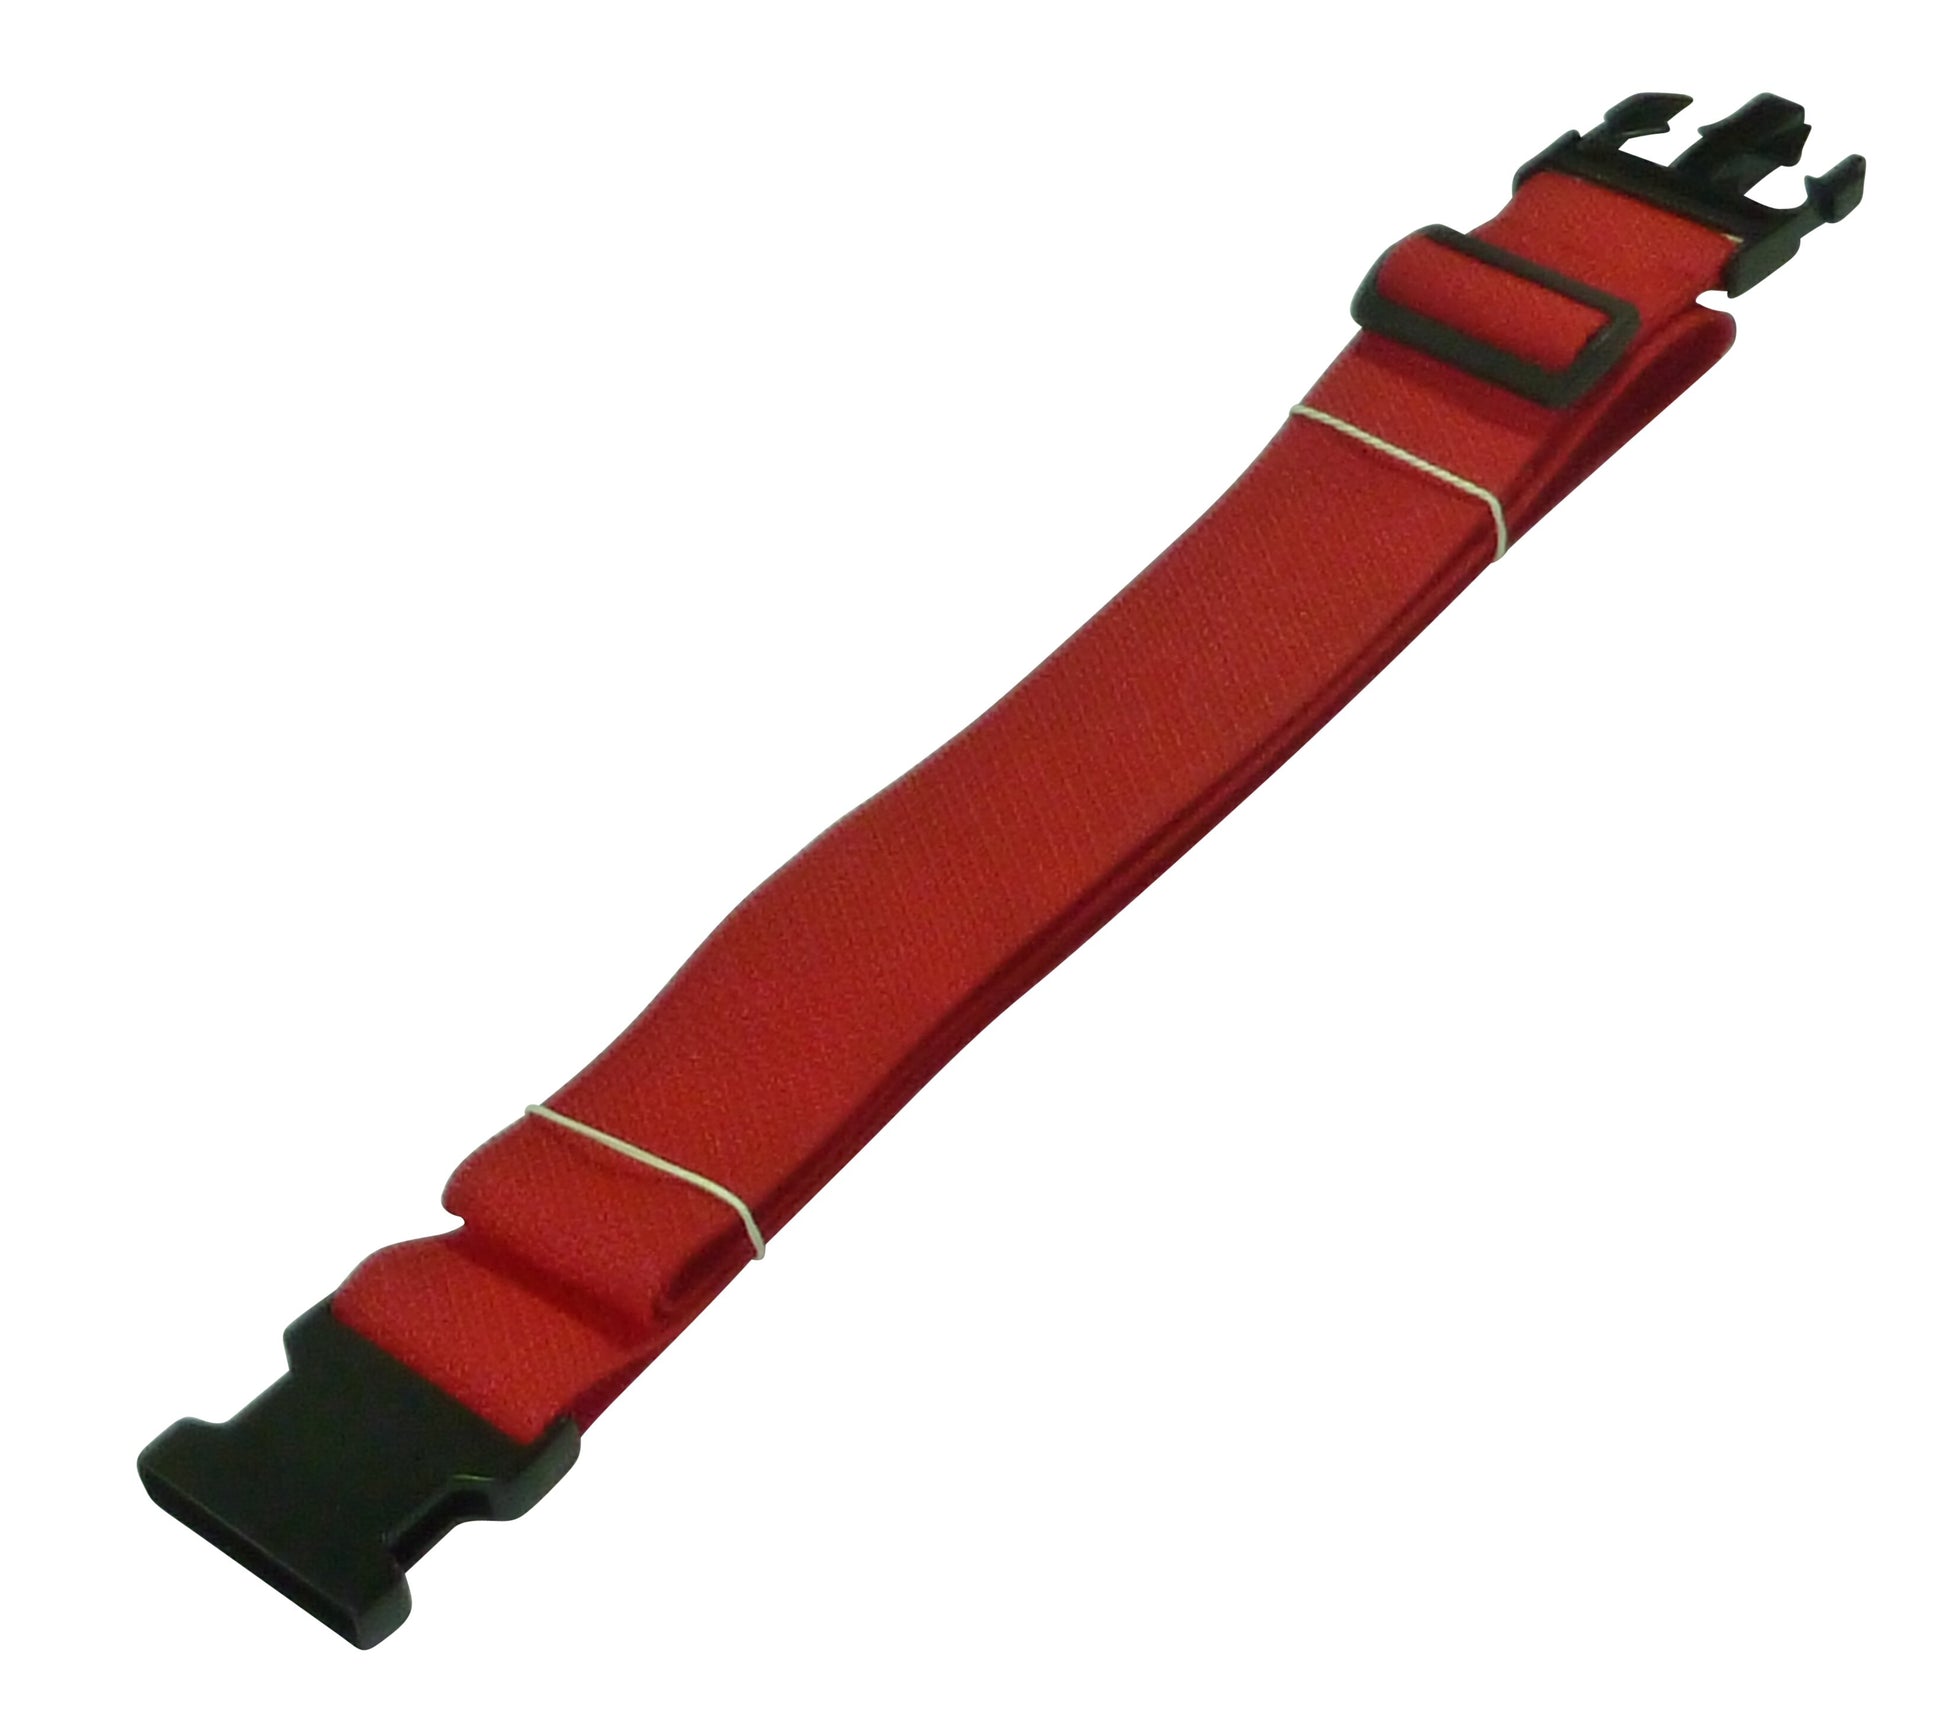 Benristraps 50mm Webbing Strap with Quick Release & Length-Adjusting Buckles in red